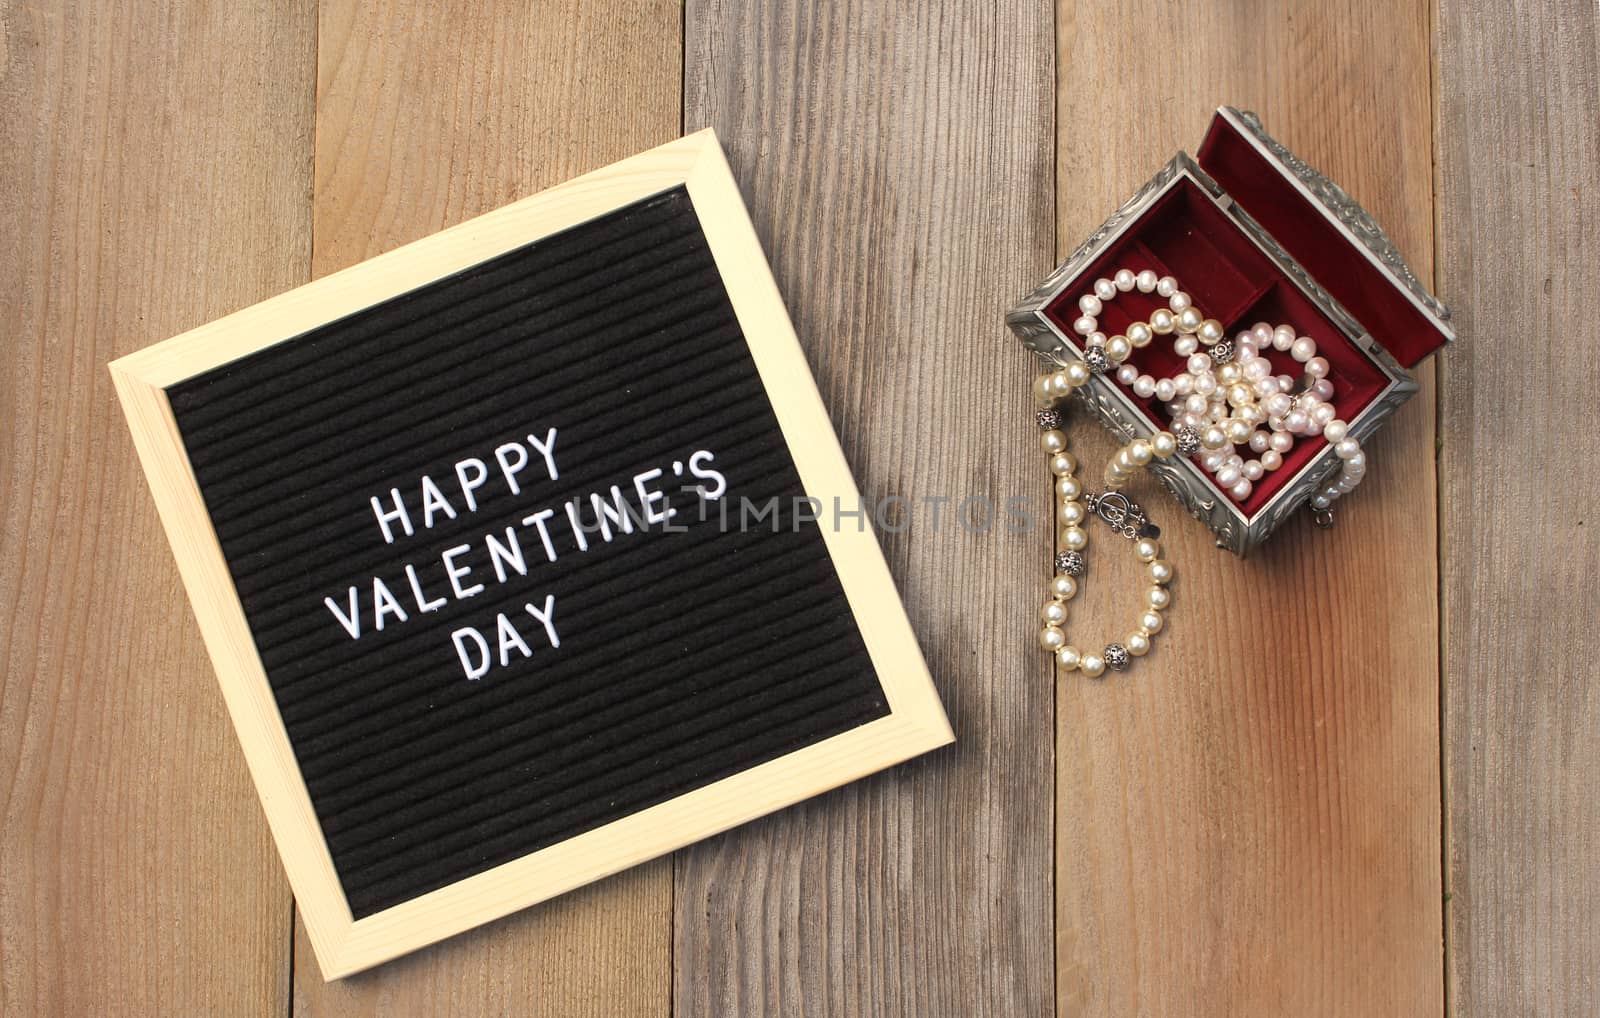 Happy Valentines Day Sign With Rose and Jewelry Box by Marti157900